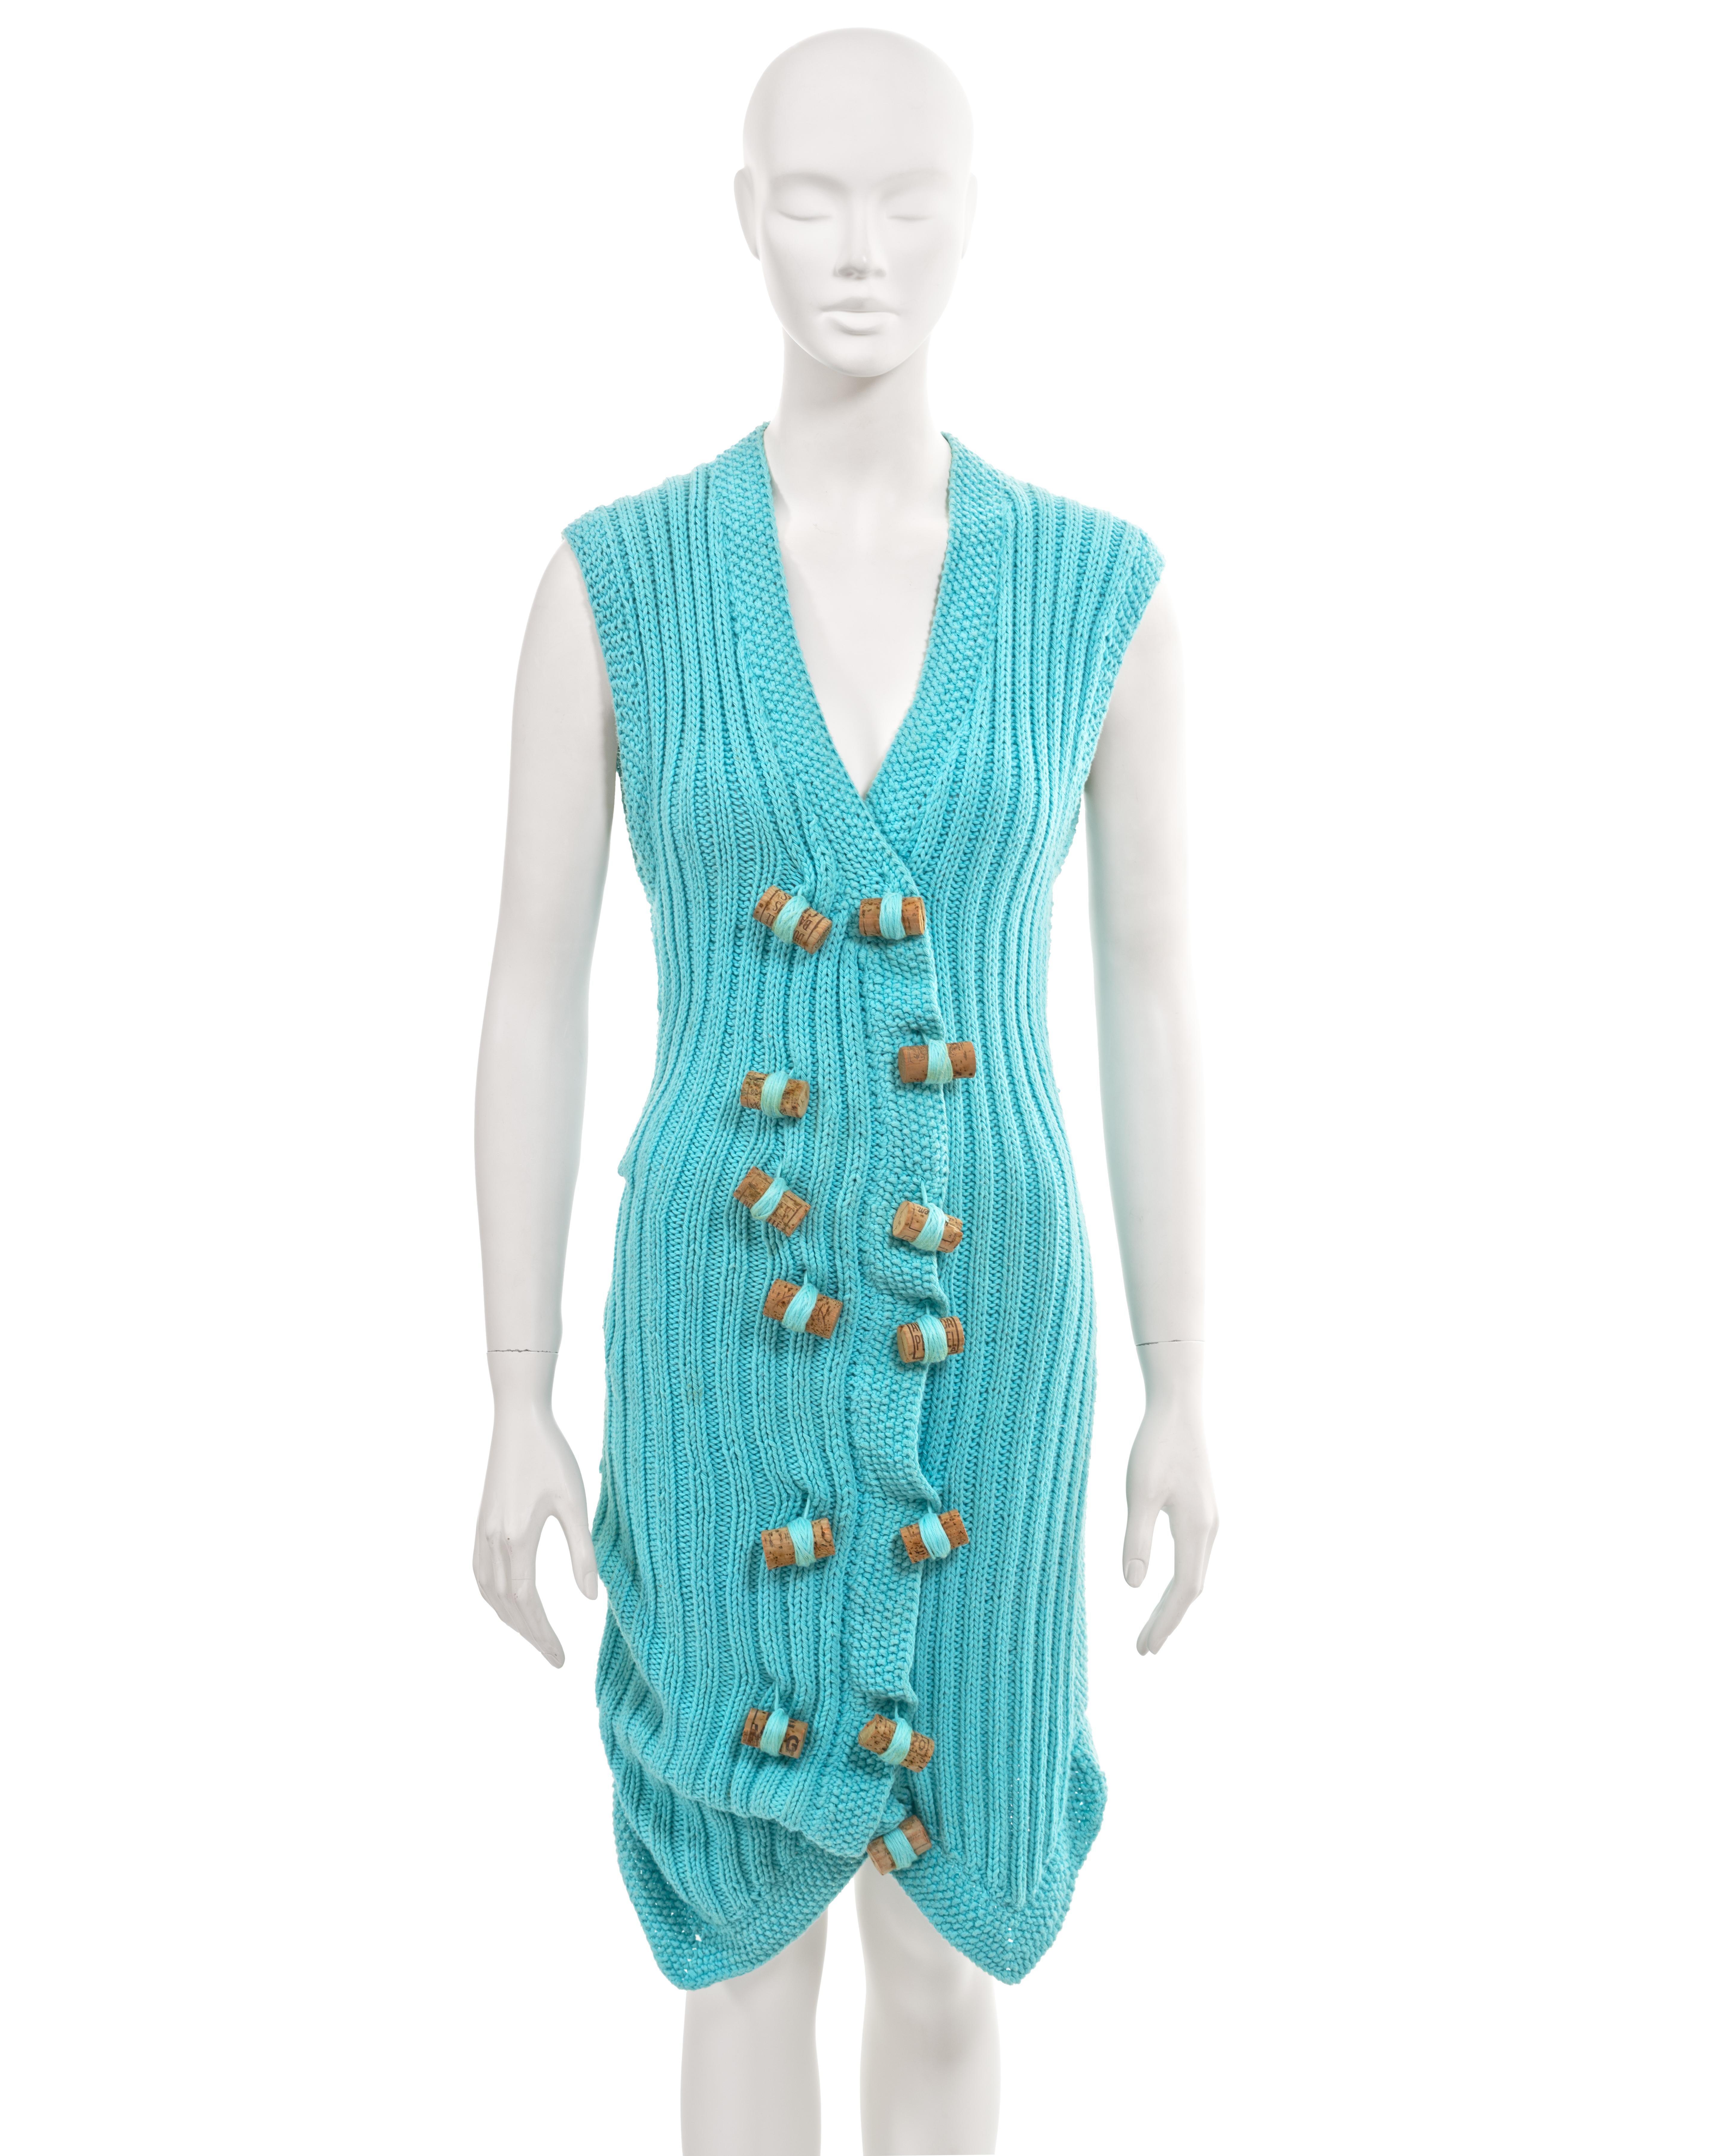 ▪ Archival John Galliano knitted dress
▪ 'The Ludic Game', Fall-Winter 1985
▪ Sold by One of a Kind Archive
▪ Museum Grade
▪ Hand-knitted using turquoise cotton
▪ The front showcases a ribbed texture
▪ The back features a herringbone pattern
▪